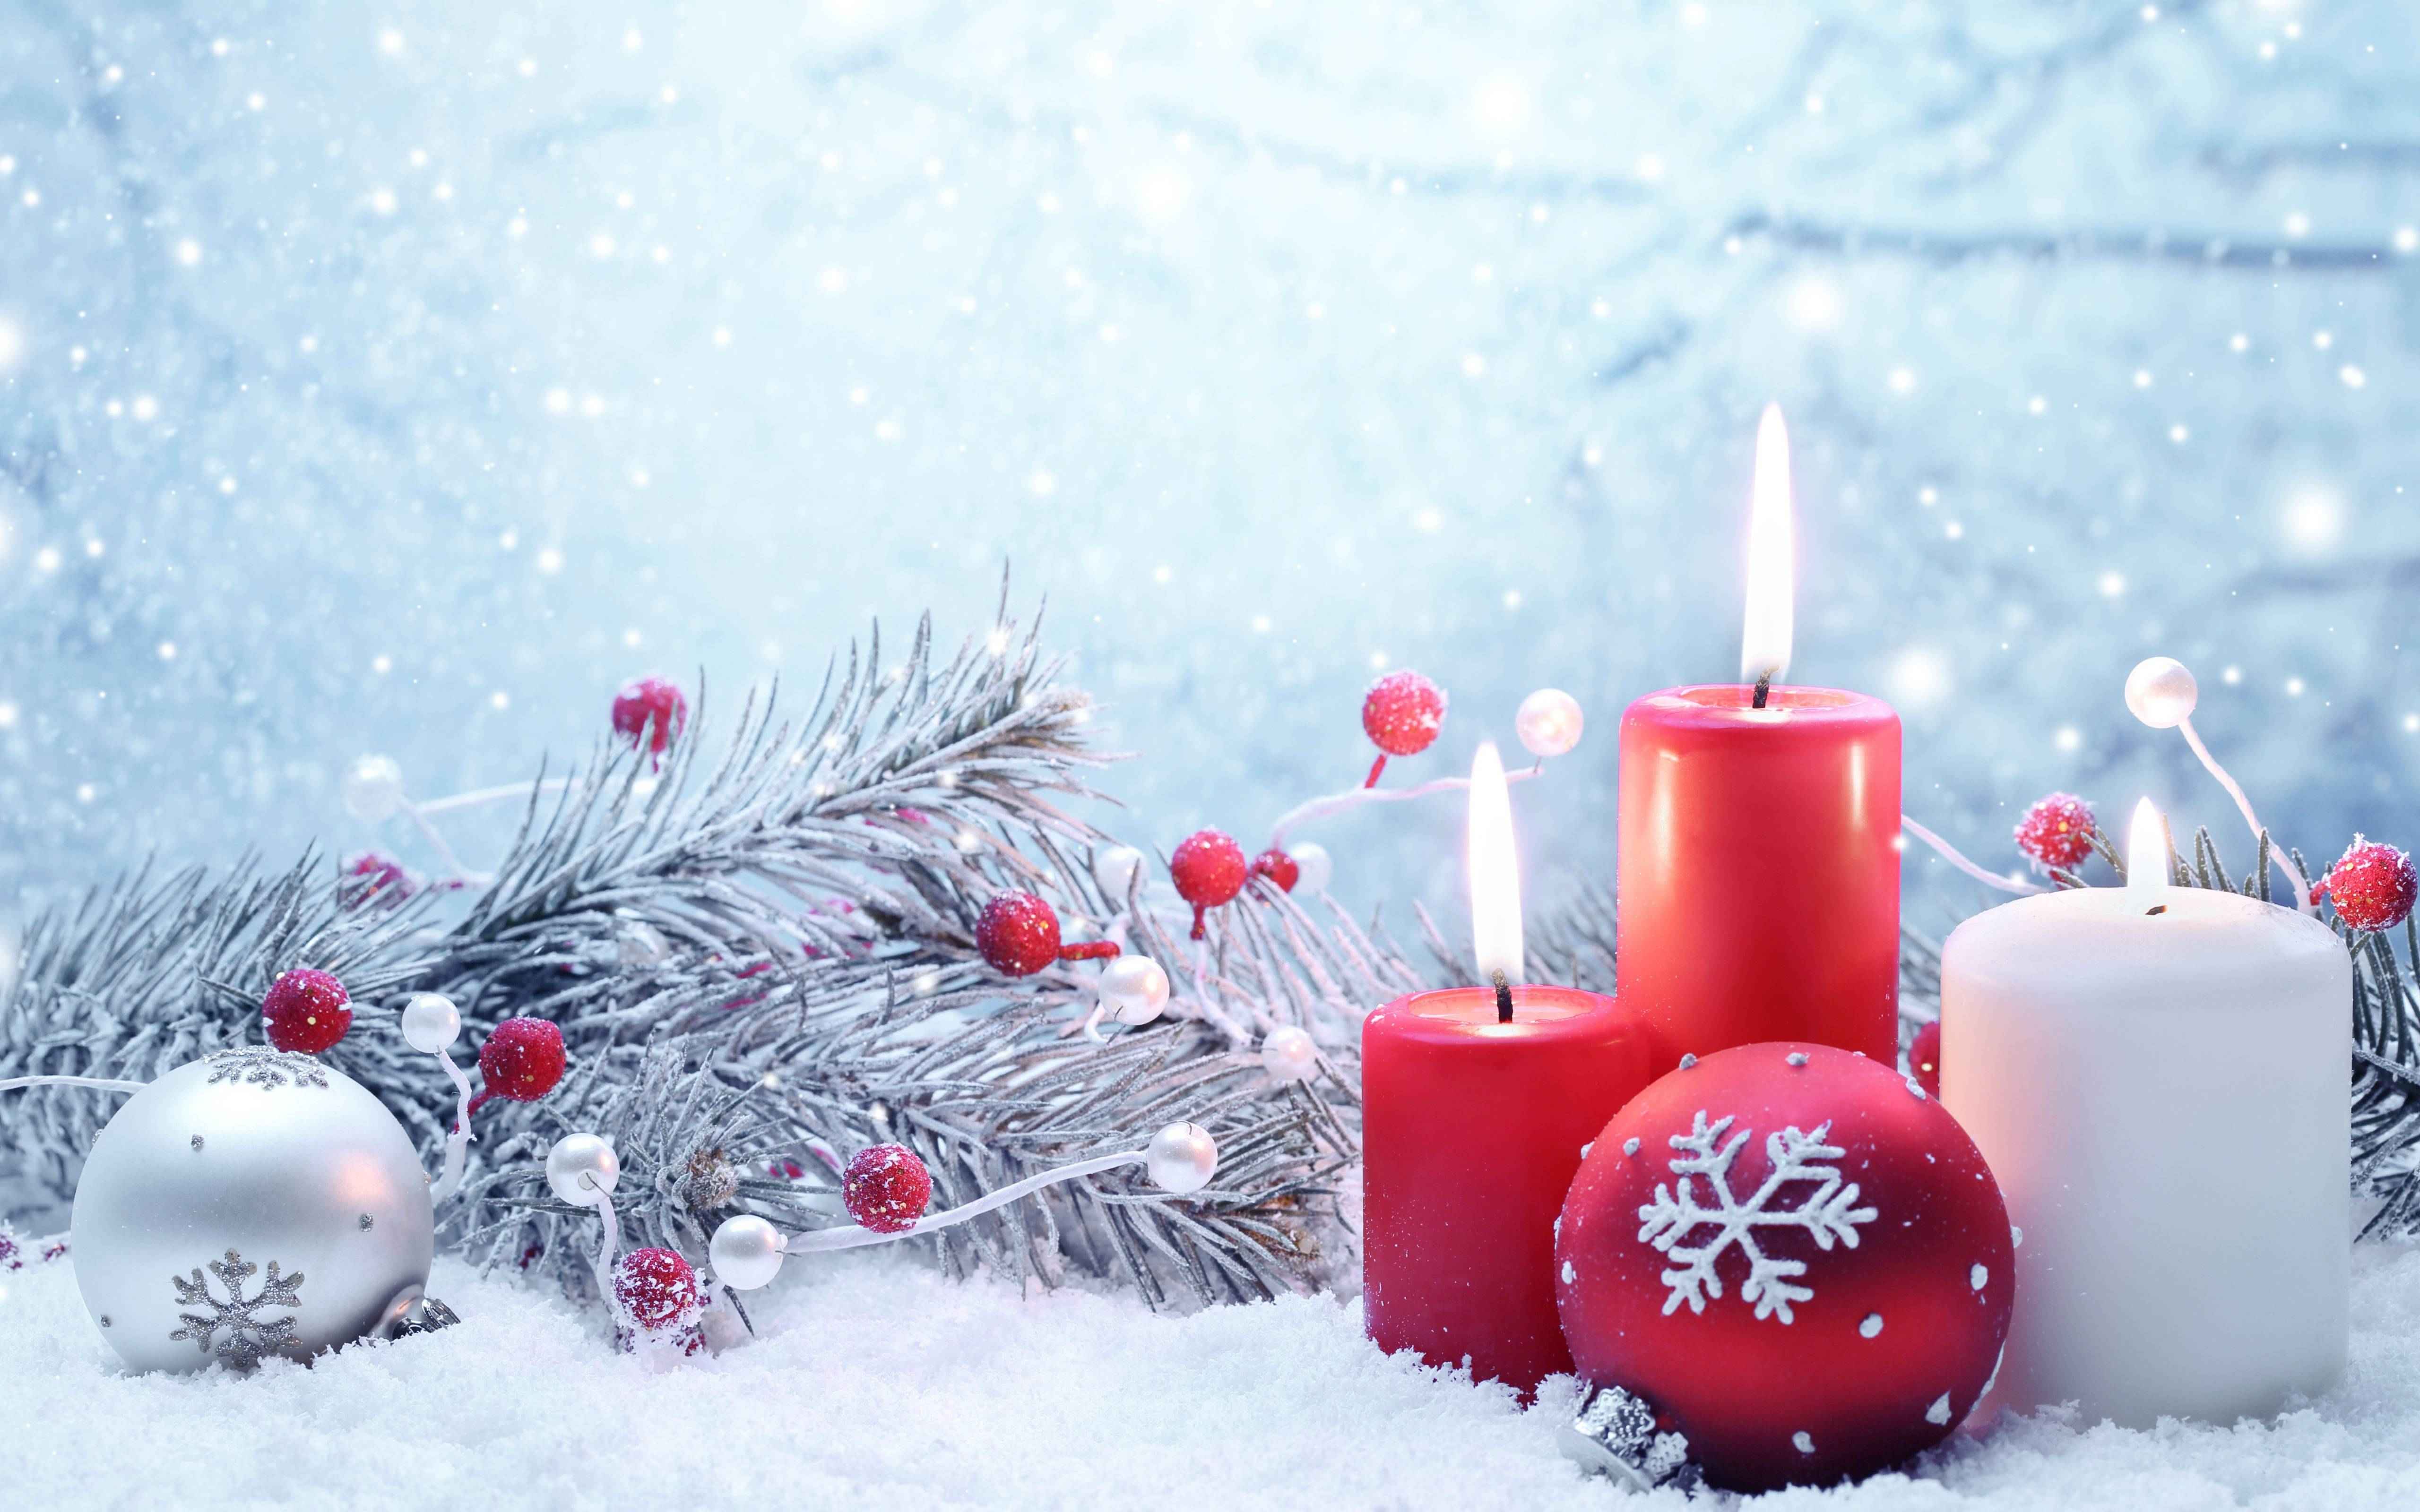 Free download christmast wallpaper Wallpapers For Snowy Christmas